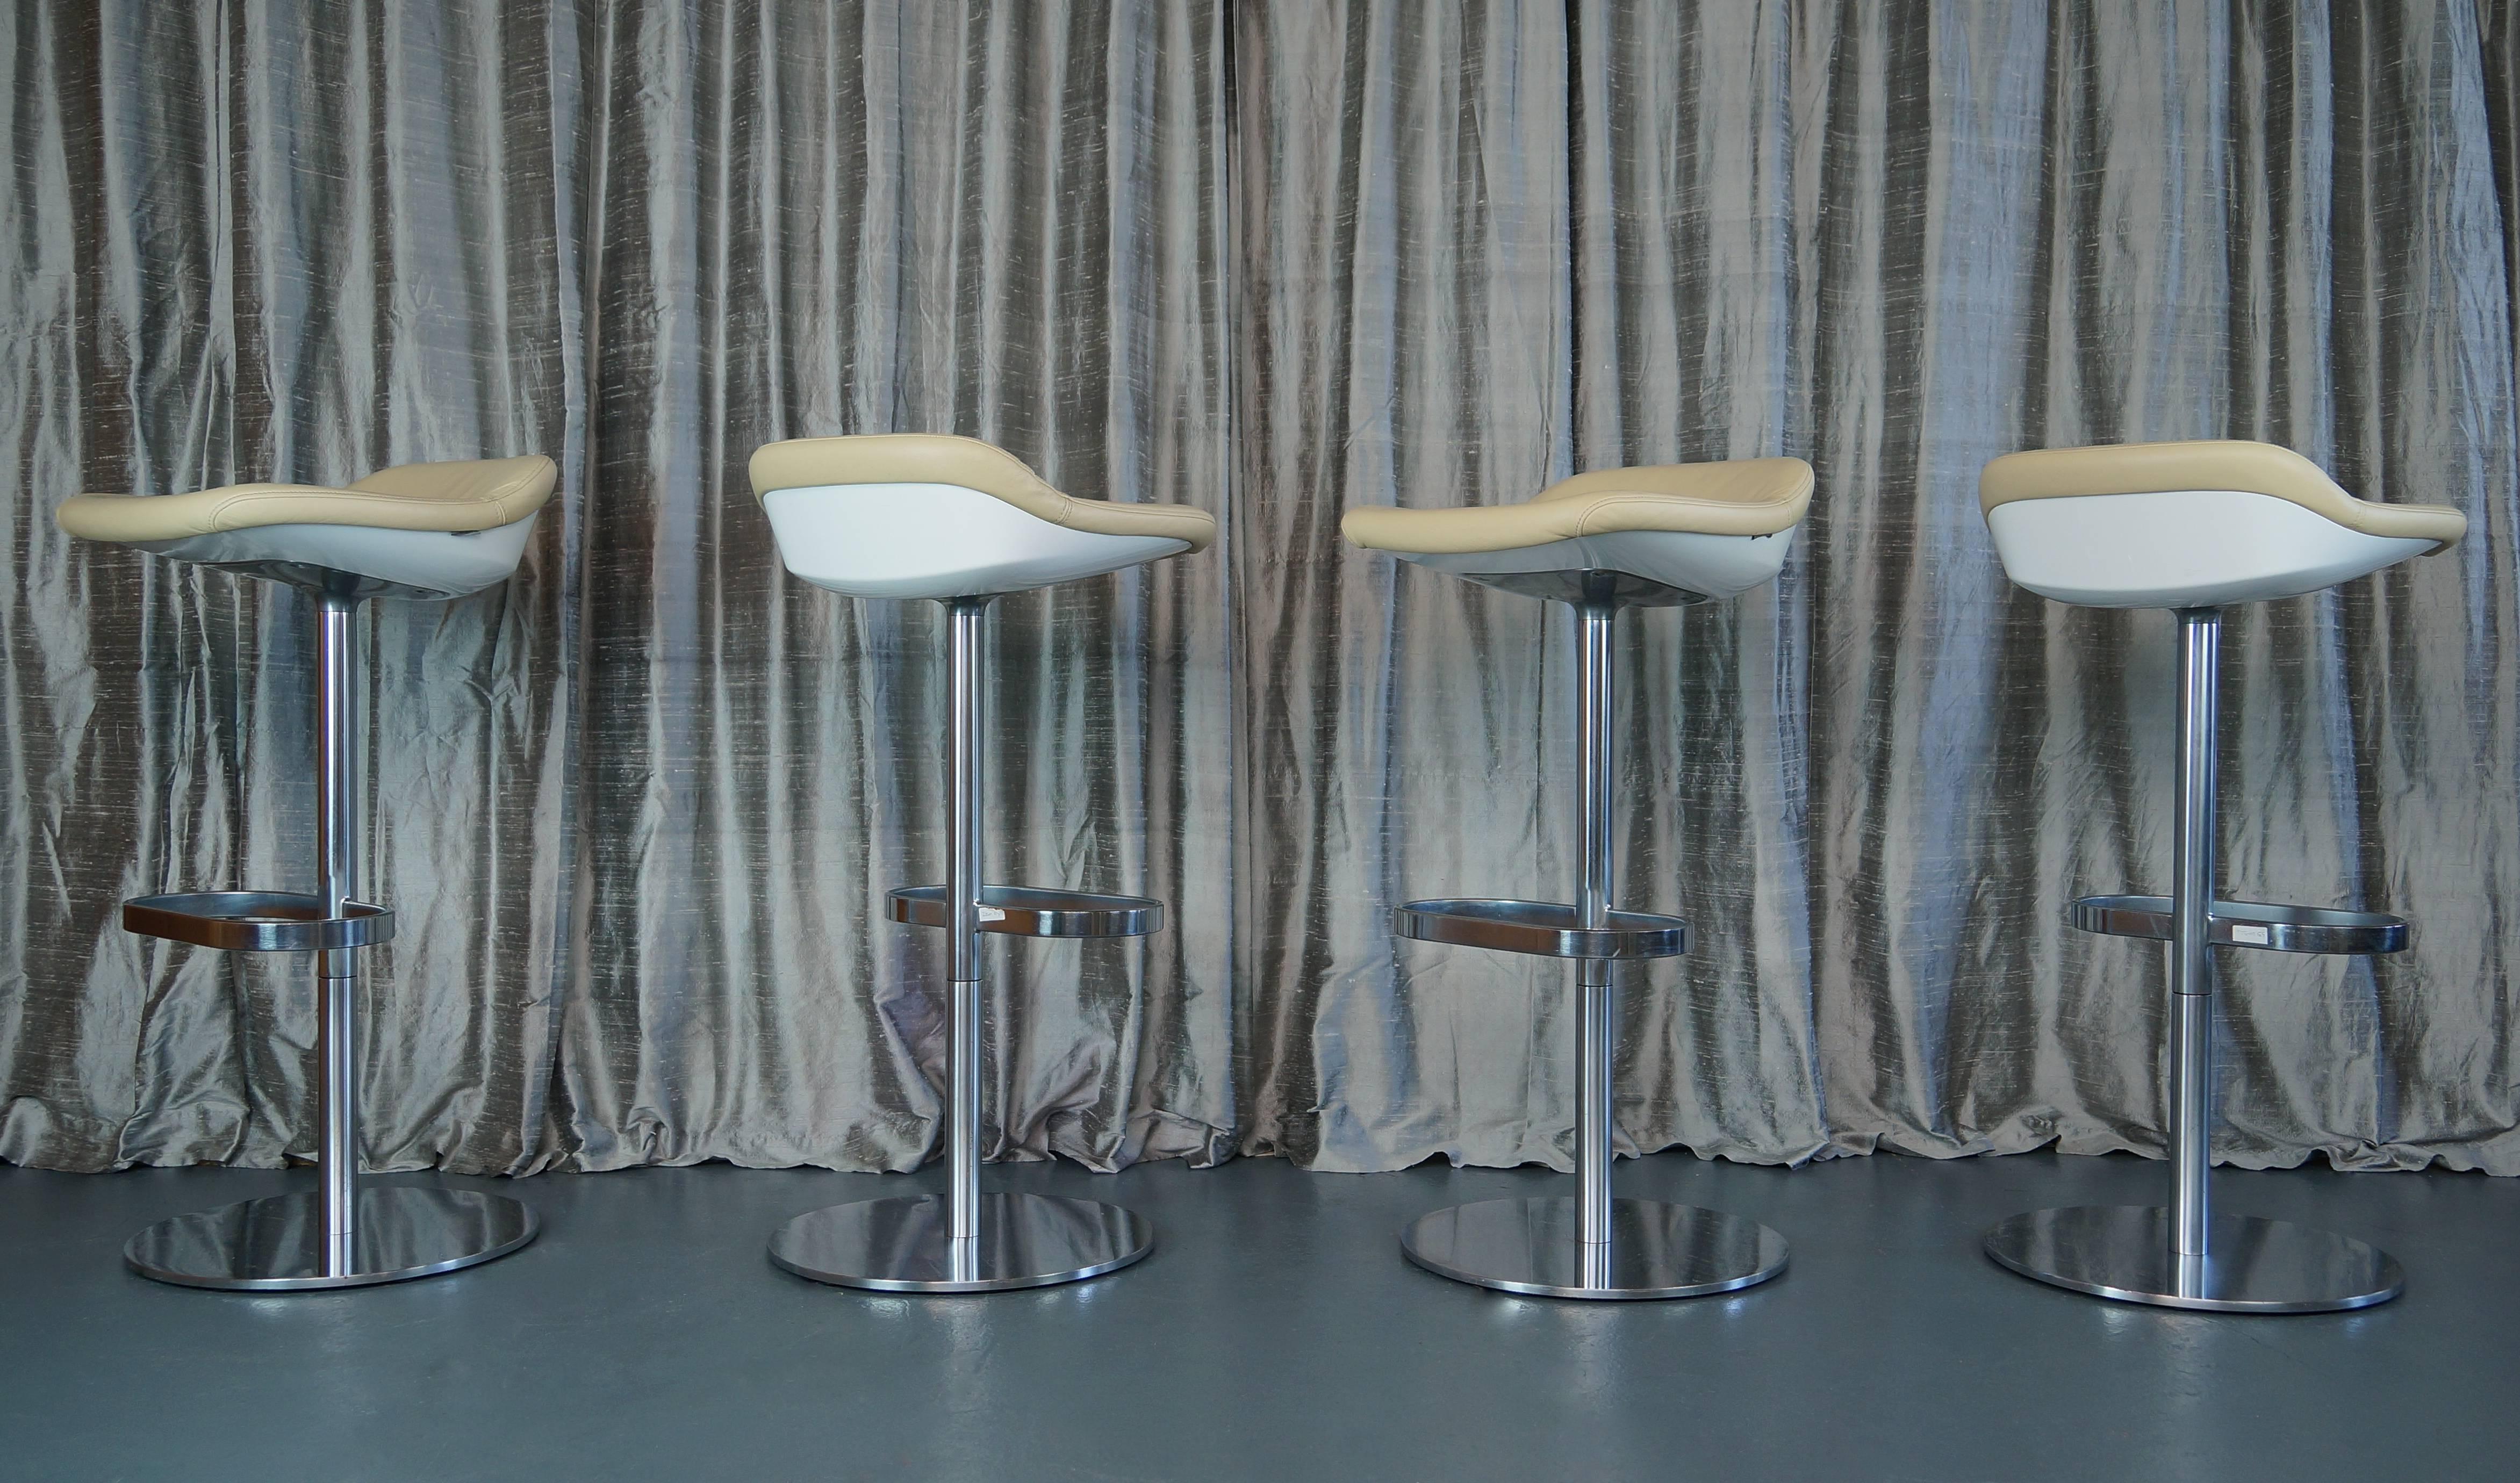 Walter Knoll ‘Turtle’ bar stools by Pearson Lloyd, set of four

Design year: 2005
Designer: Luke Pearson, Tom Lloyd renowned London design team
Maker: Walter Knoll

These sleek, compact bar stools have a hard outer shell (Turtle ) that gives